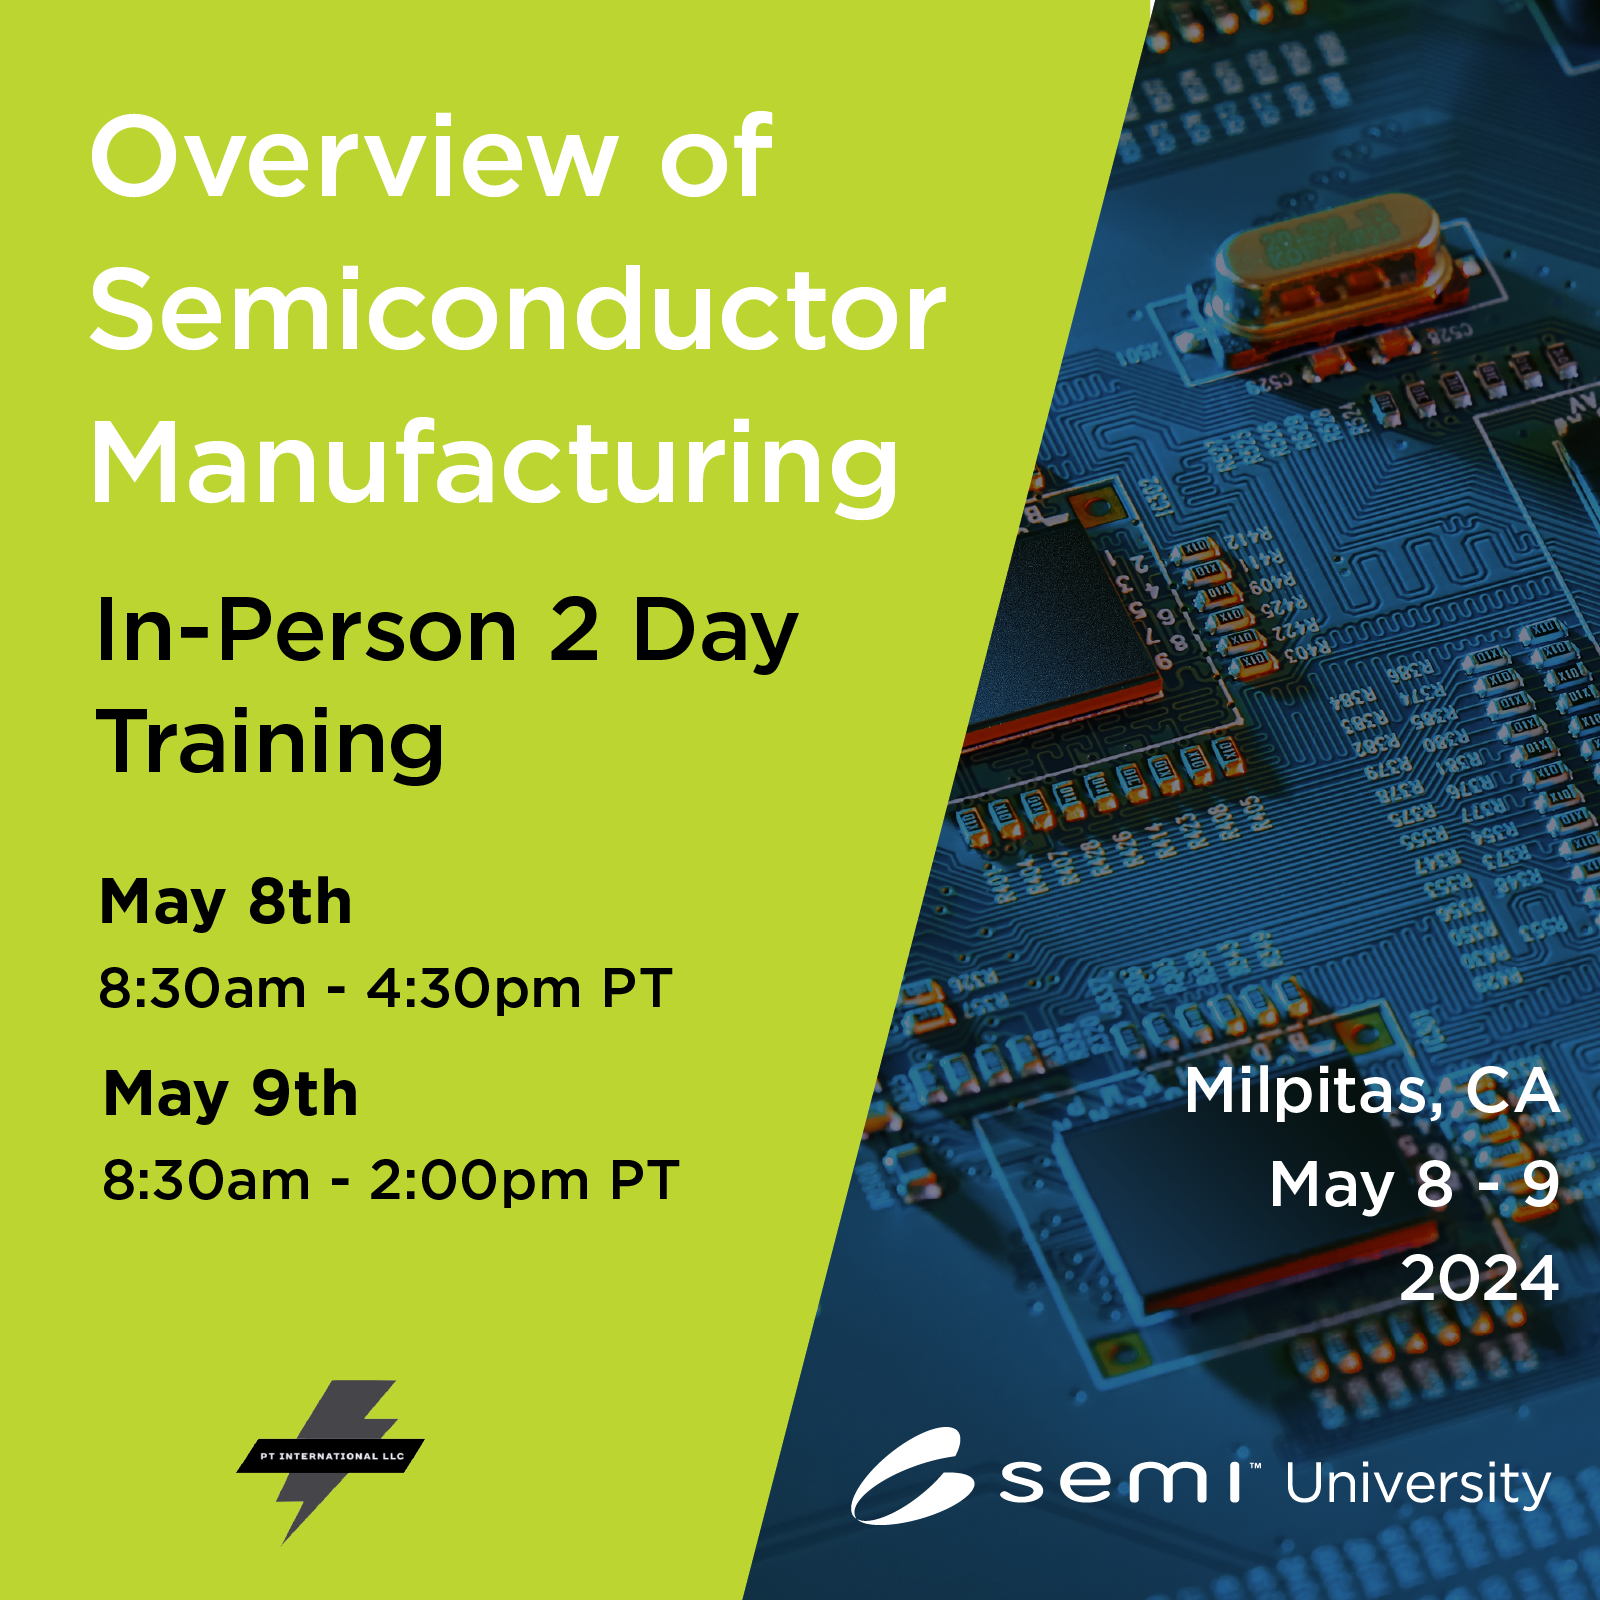 Overview of Semiconductor Manufacturing